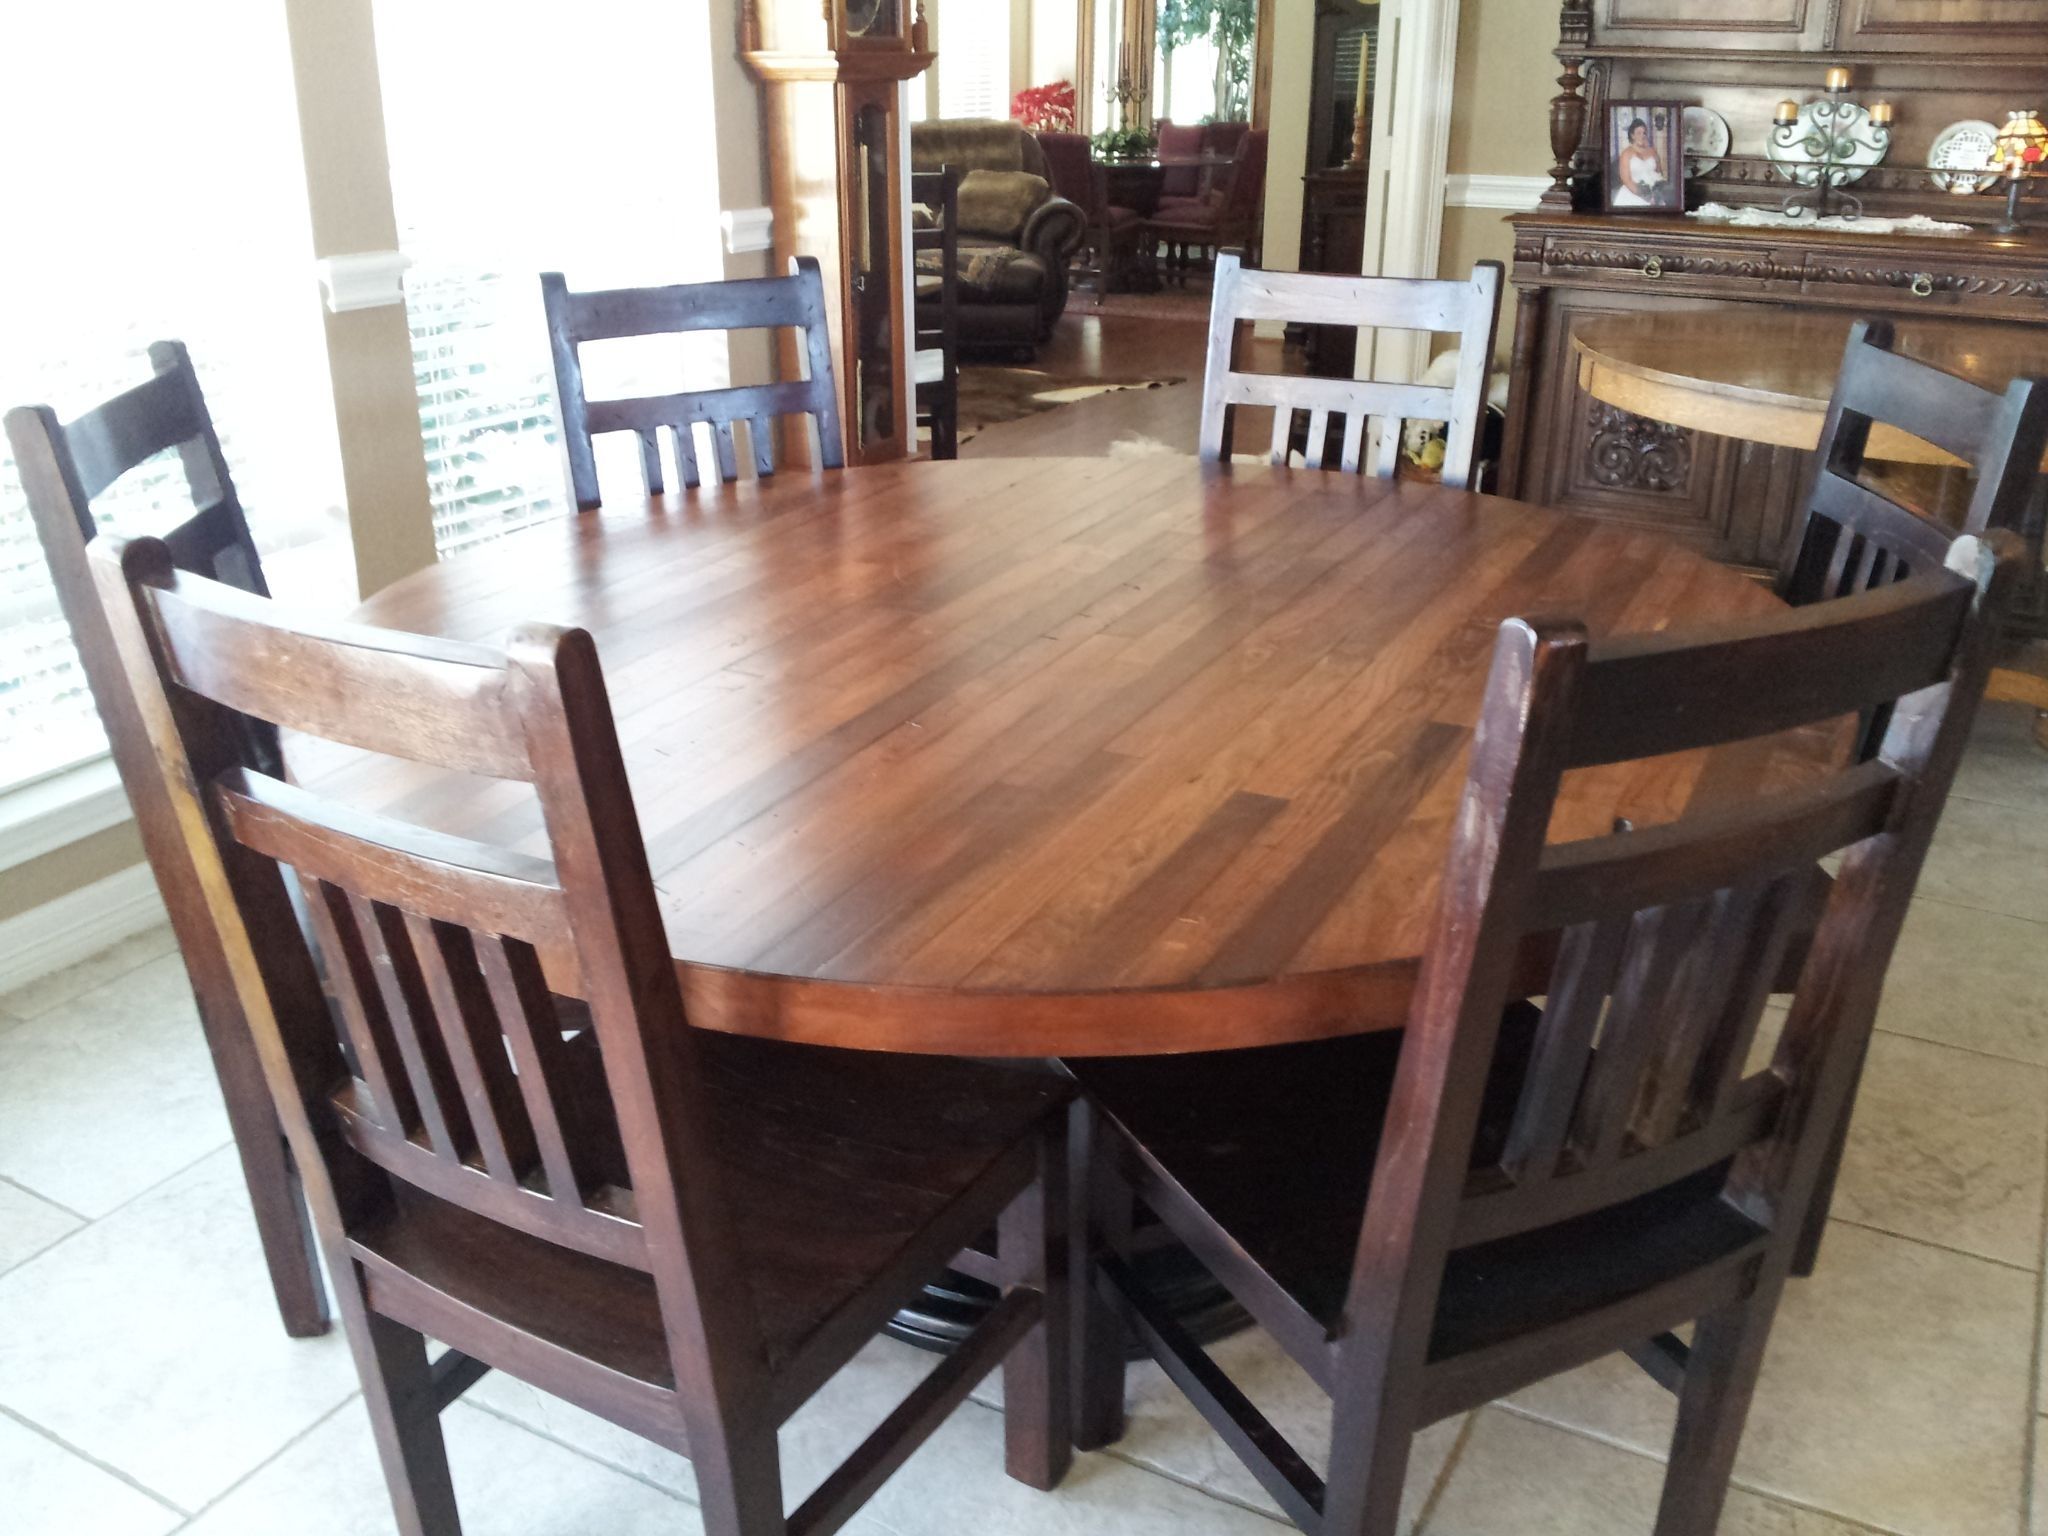 Walnut Dining Tables | Custommade Inside Latest Natural Wood & Recycled Elm 87 Inch Dining Tables (View 1 of 20)